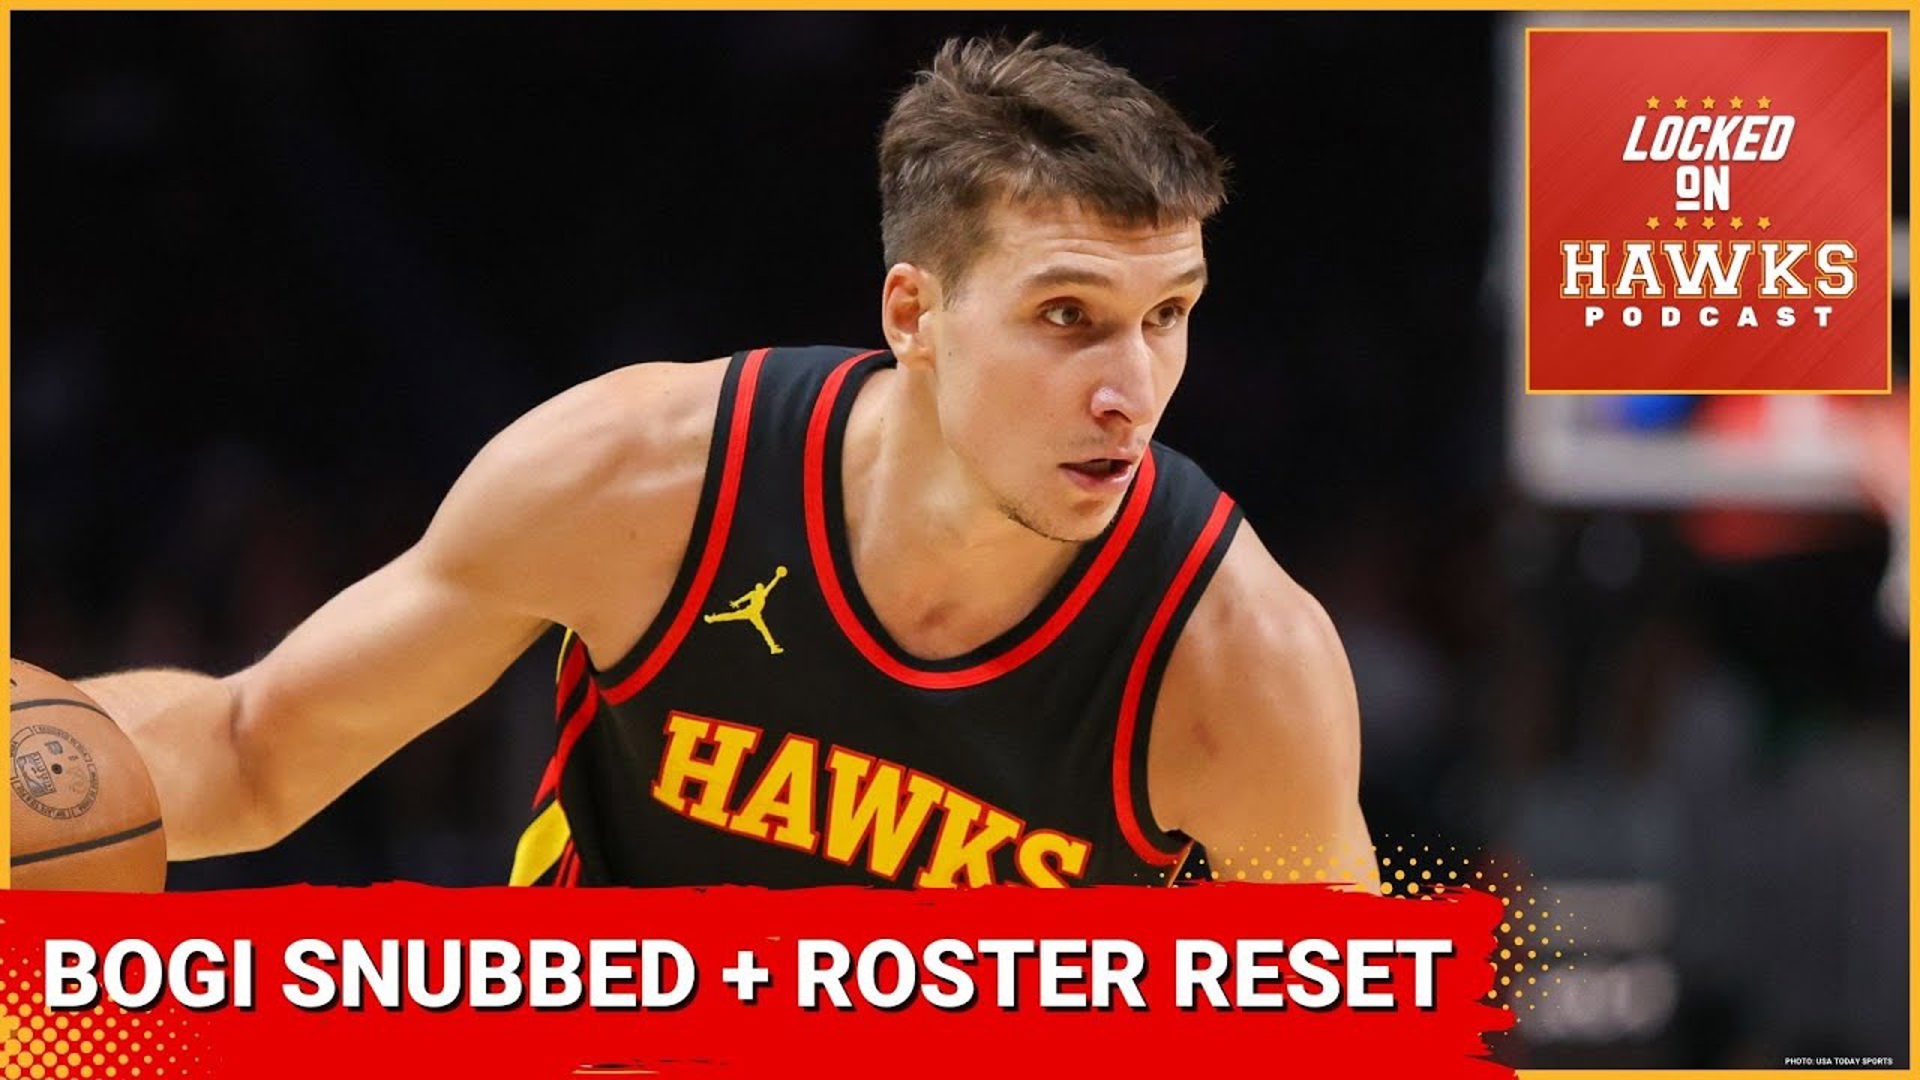 The show takes a look at the 6th Man of the Year snub for Bogdan Bogdanovic